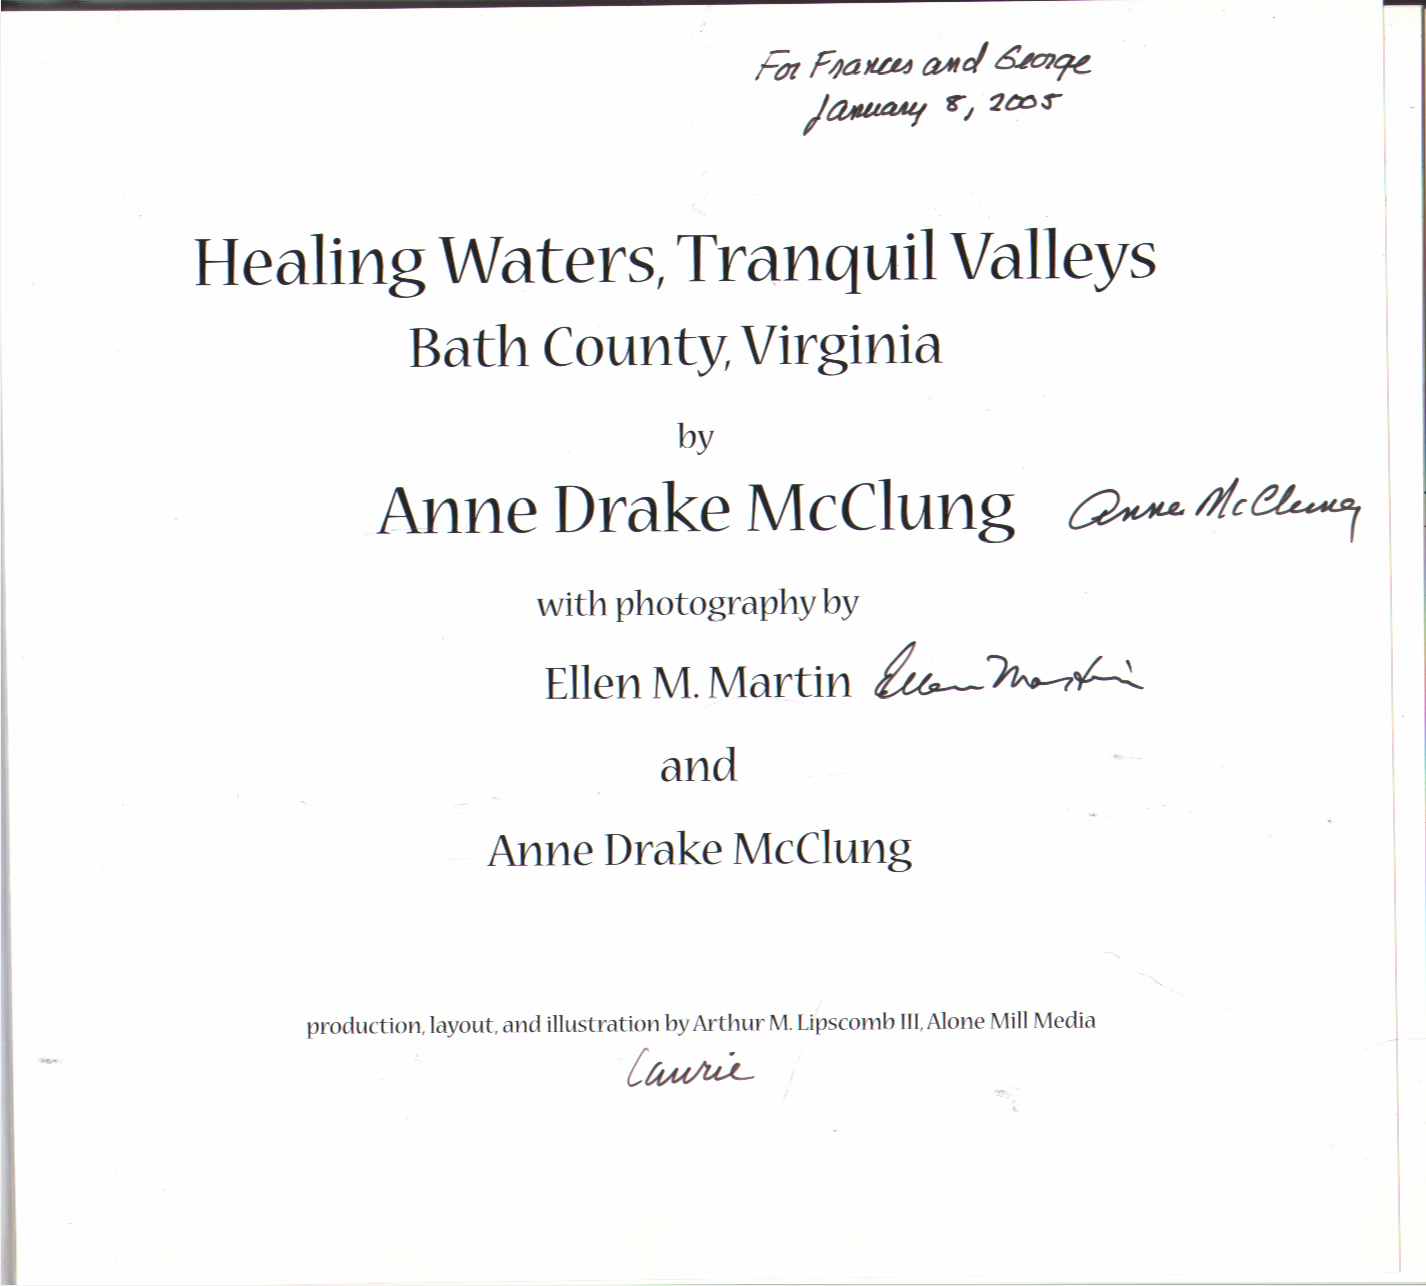 McClung, Anne Drake - HEALING WATERS, TRANQUIL VALLEYS Bath County, Virginia